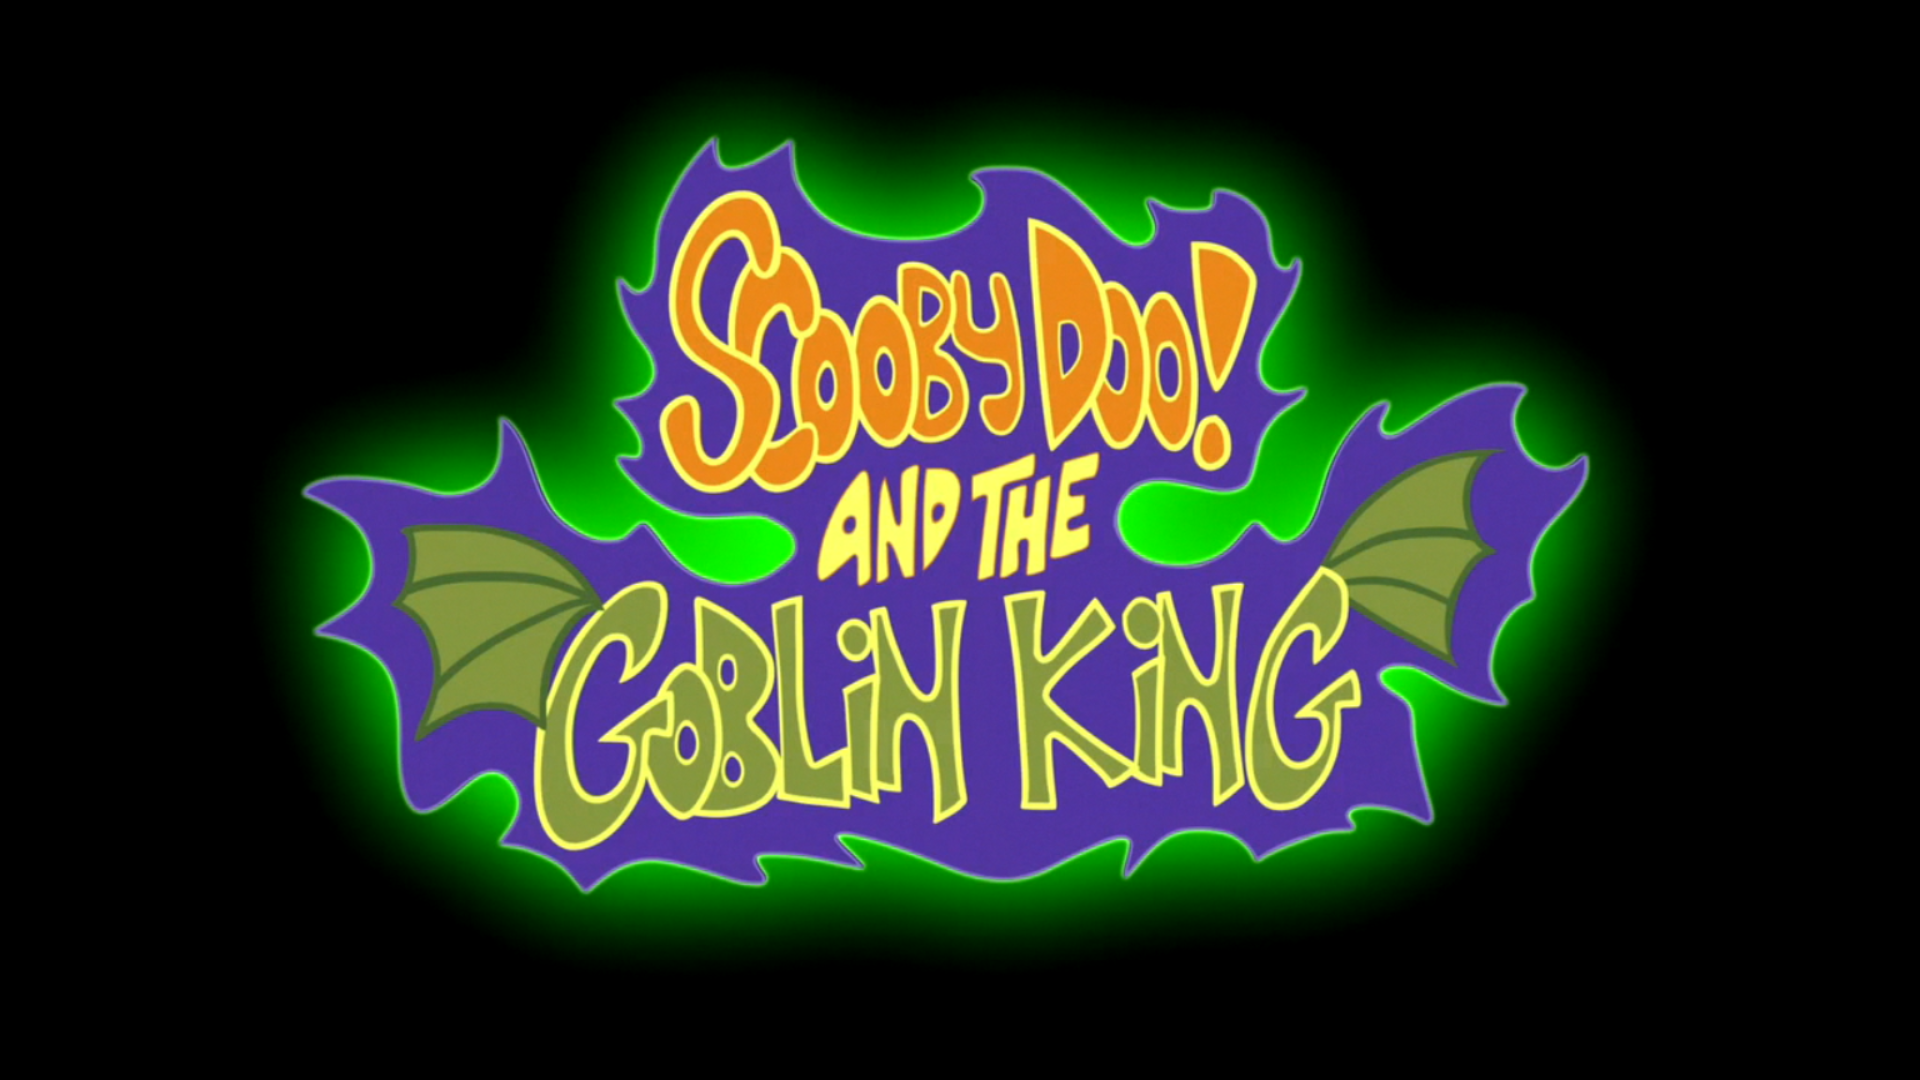 Scooby-Doo And The Goblin King #4